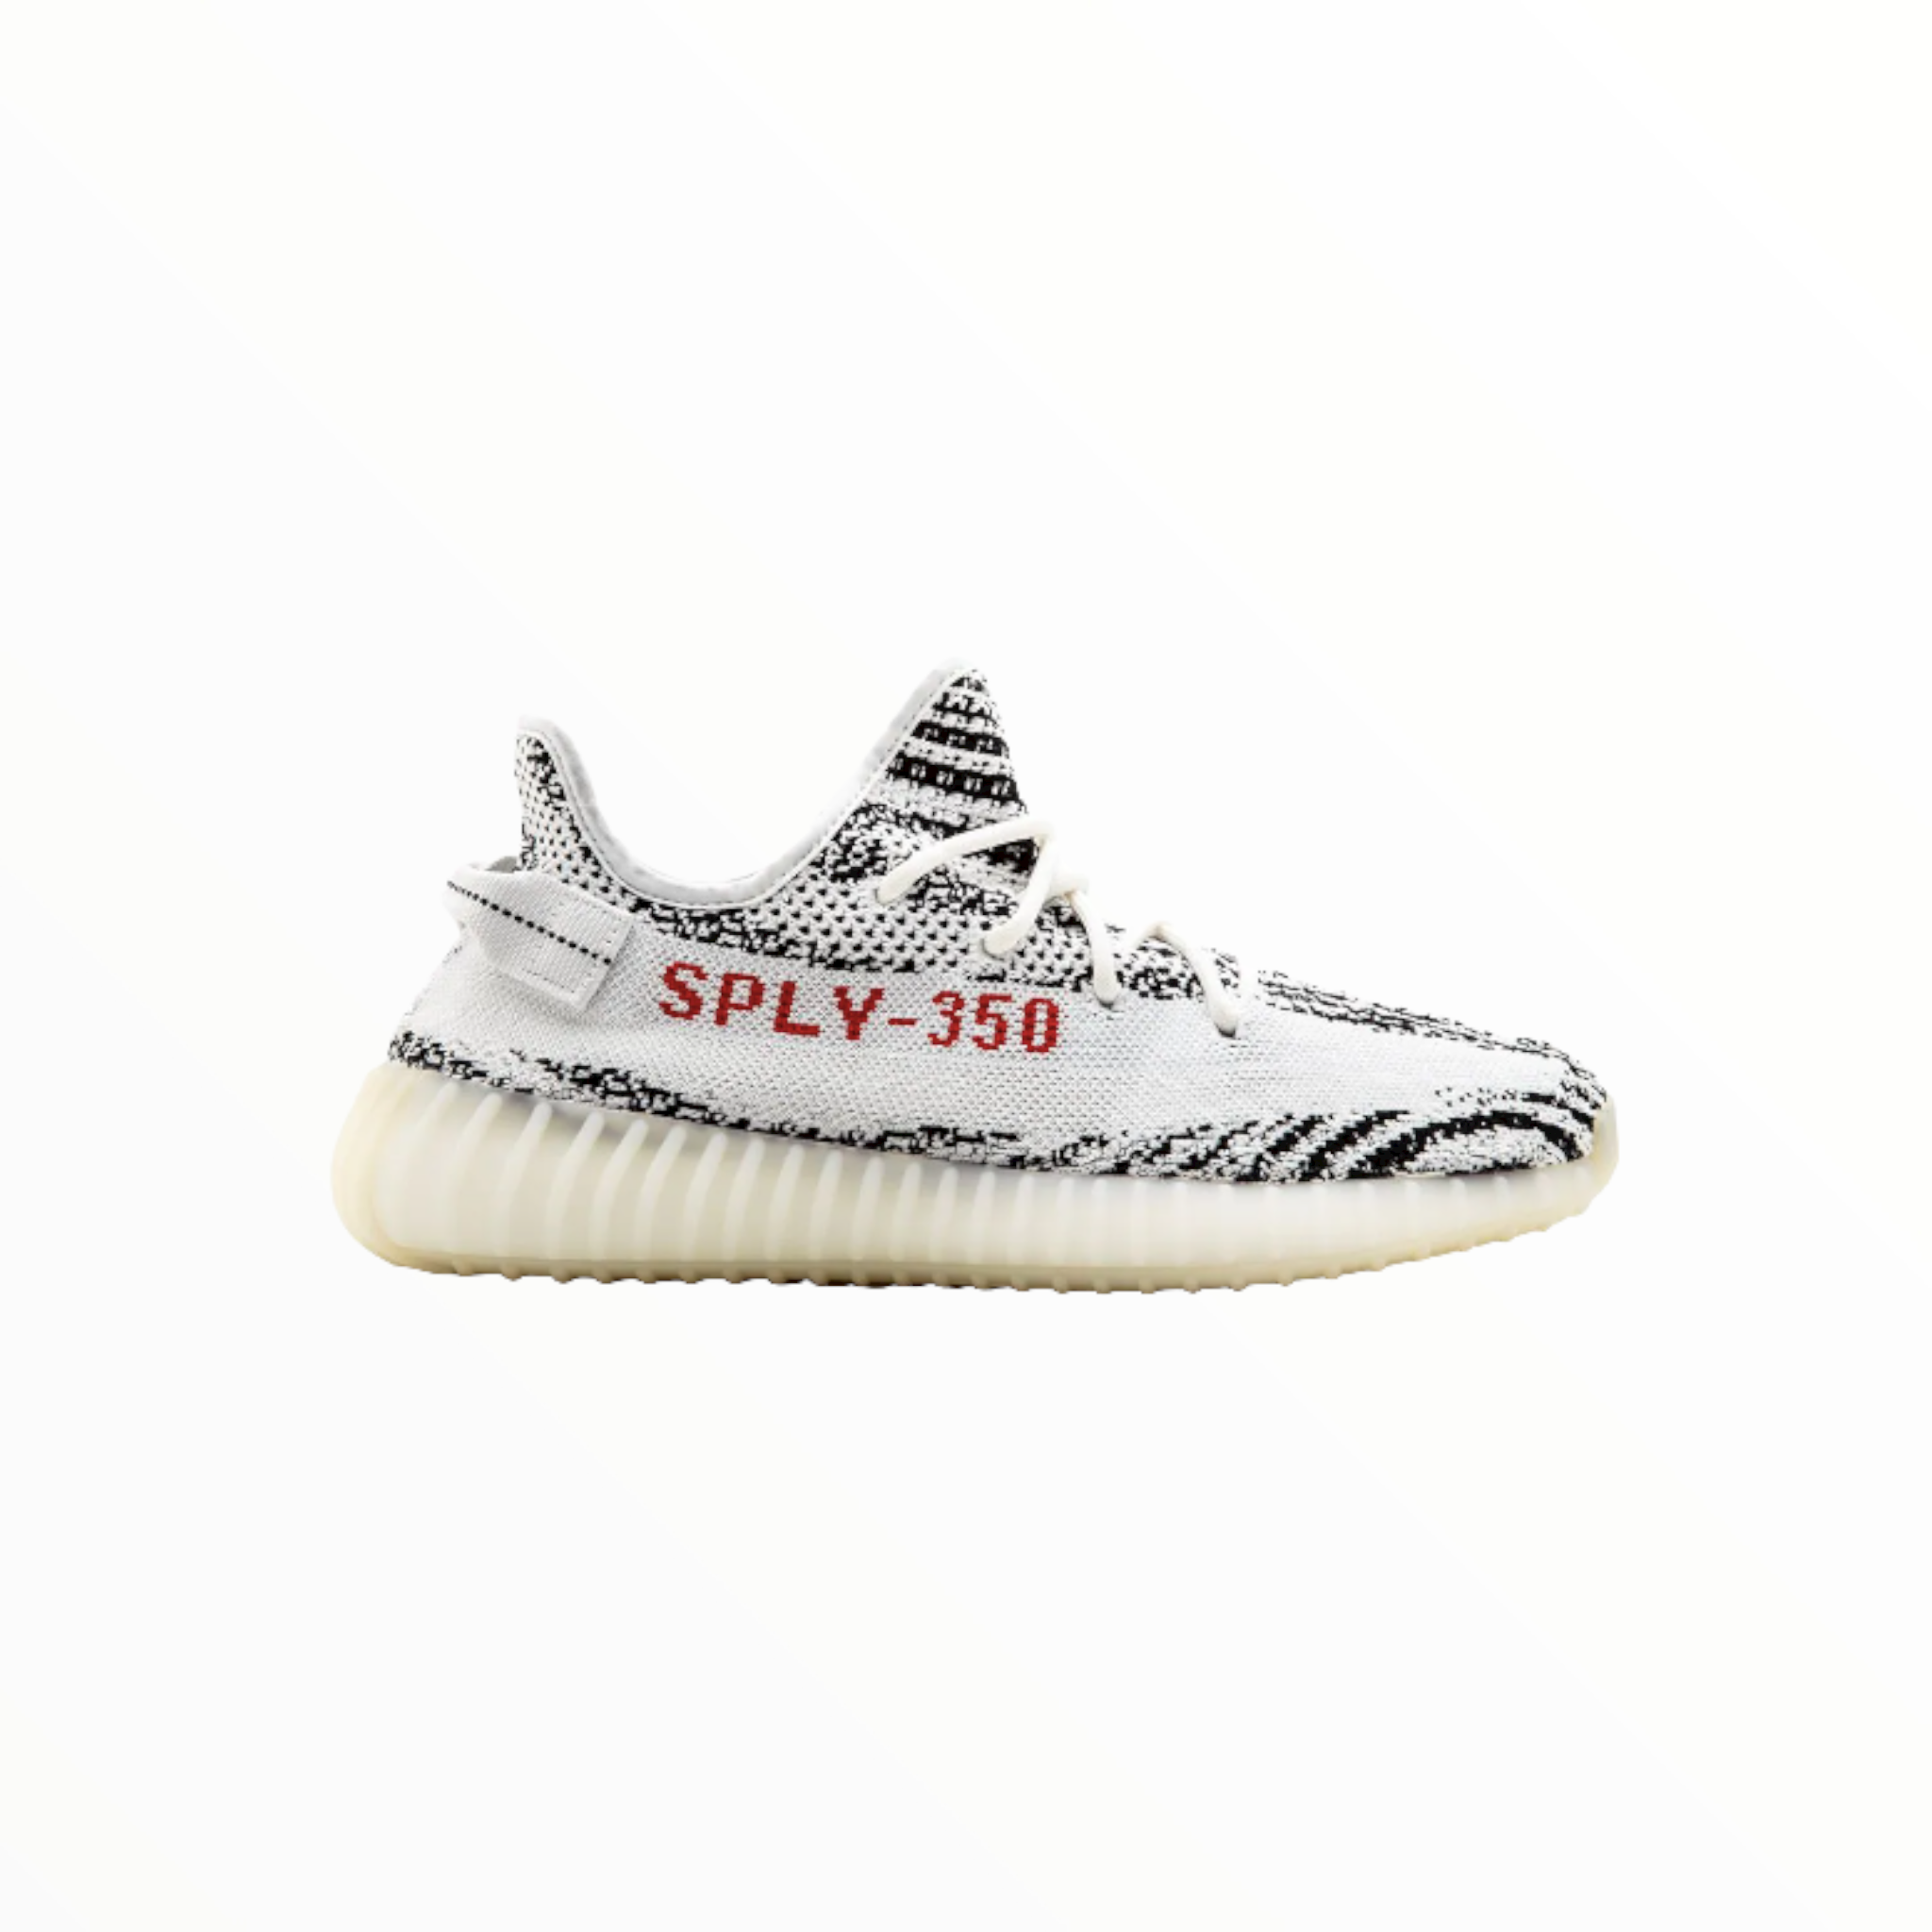 Adidas Yeezy png images